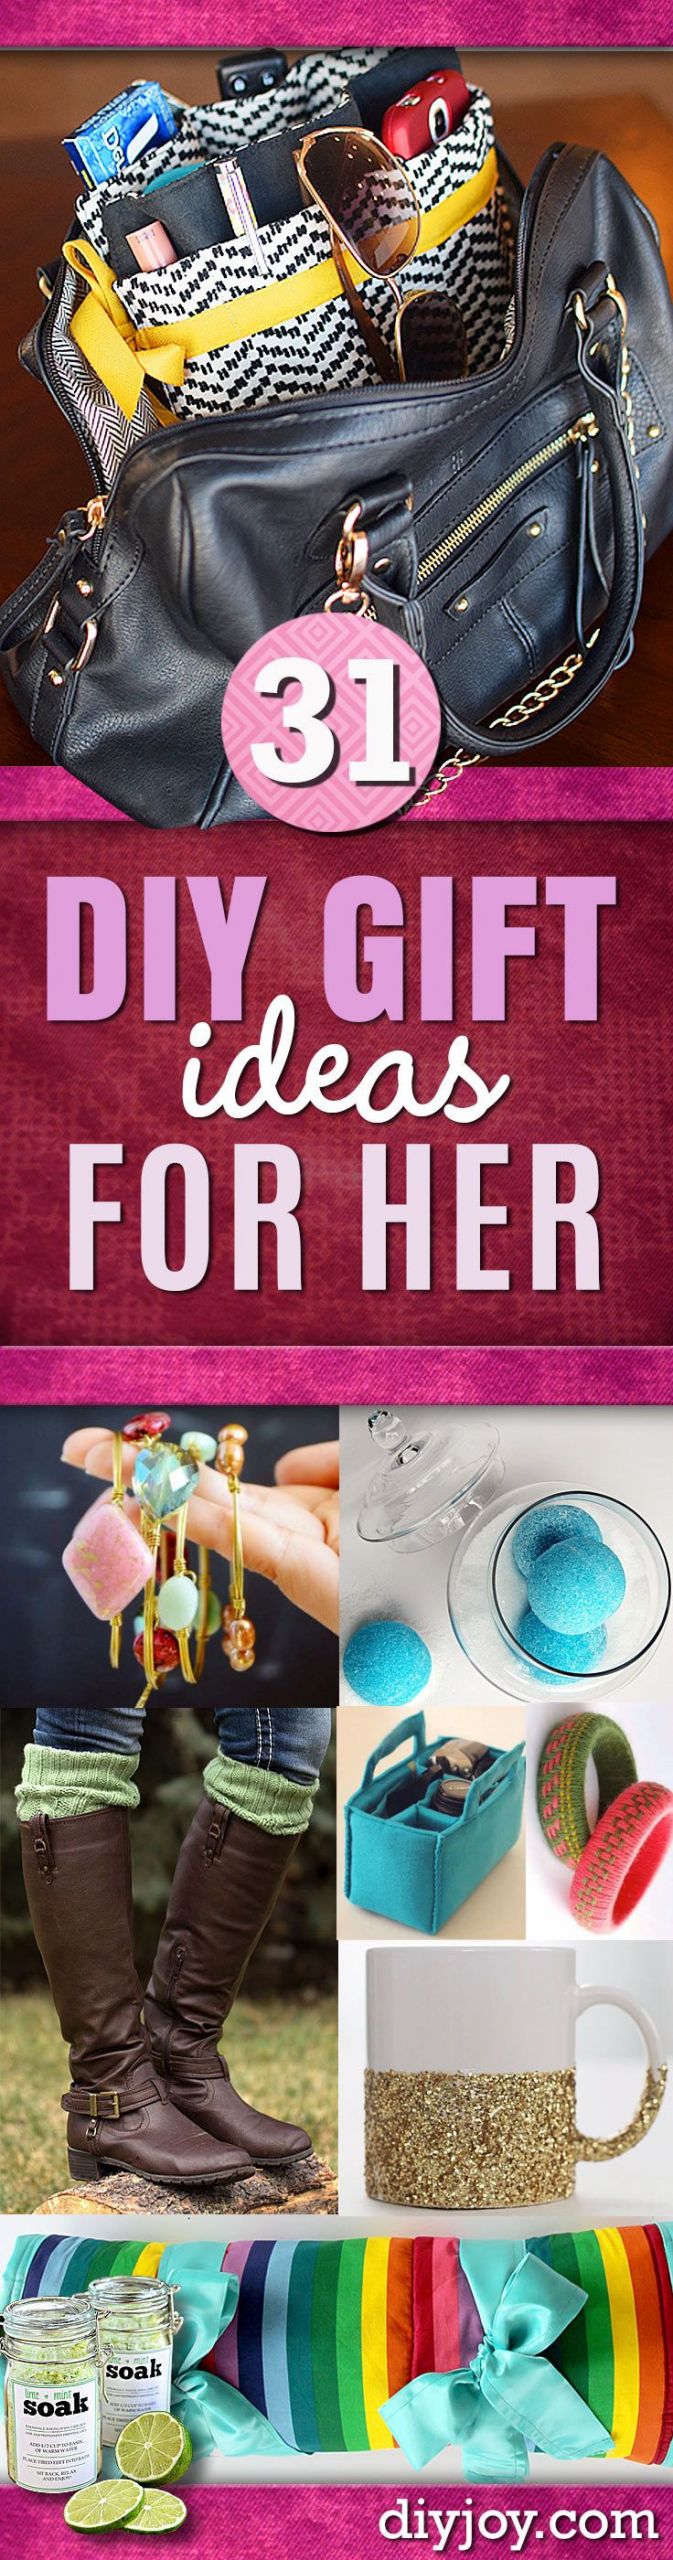 Small Gift Ideas For Girlfriends
 DIY Gift Ideas for Her